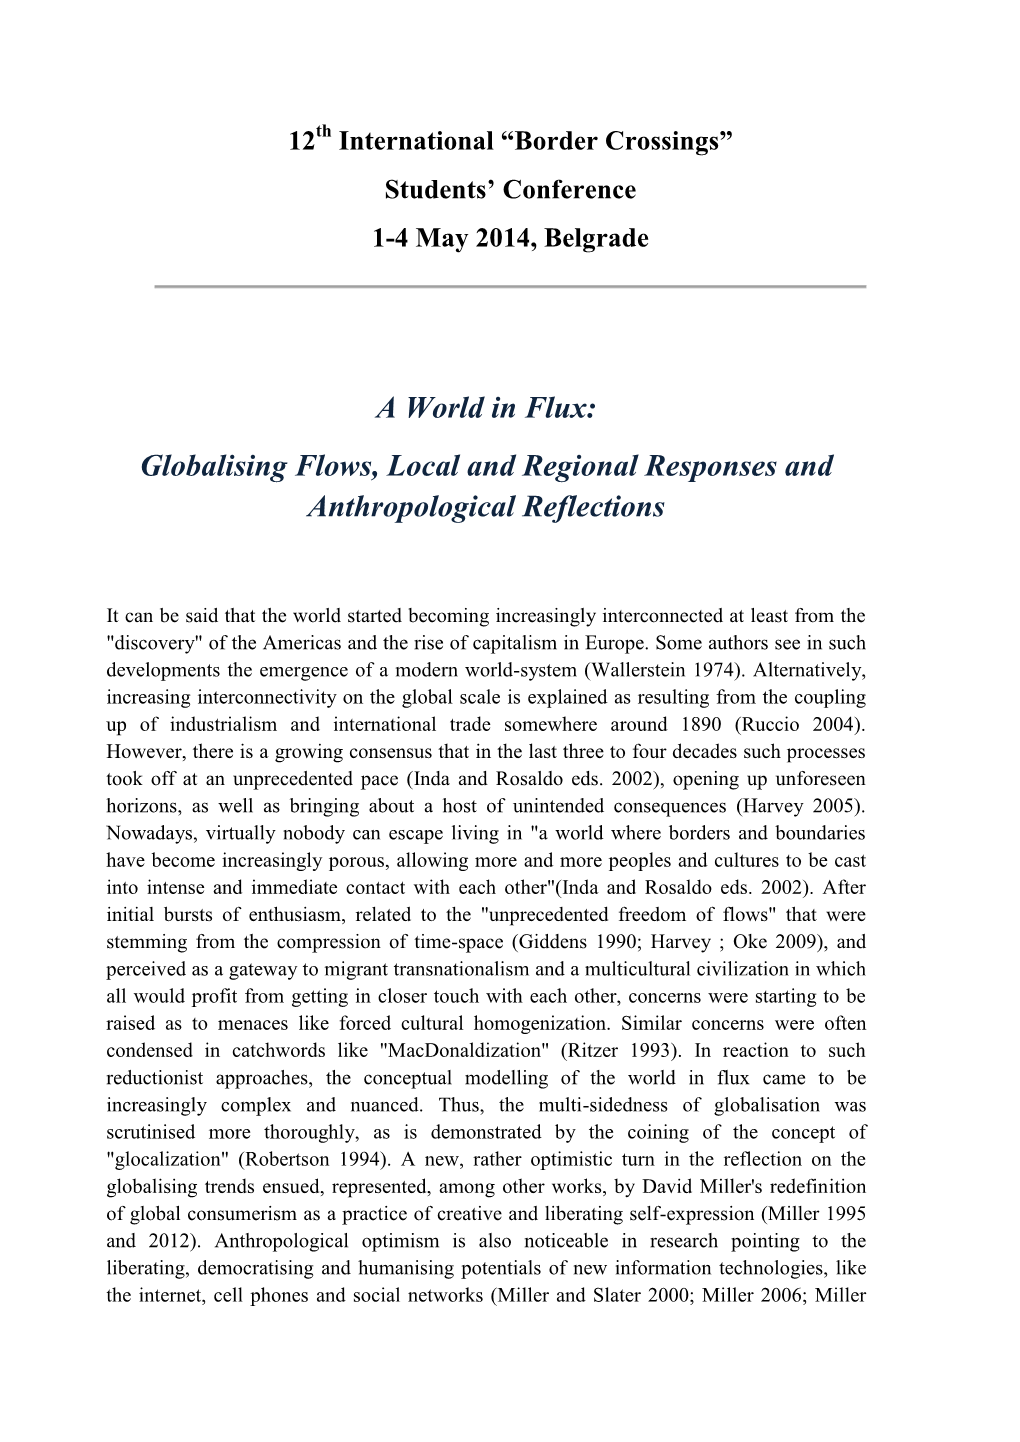 A World in Flux: Globalising Flows, Local and Regional Responses and Anthropological Reflections